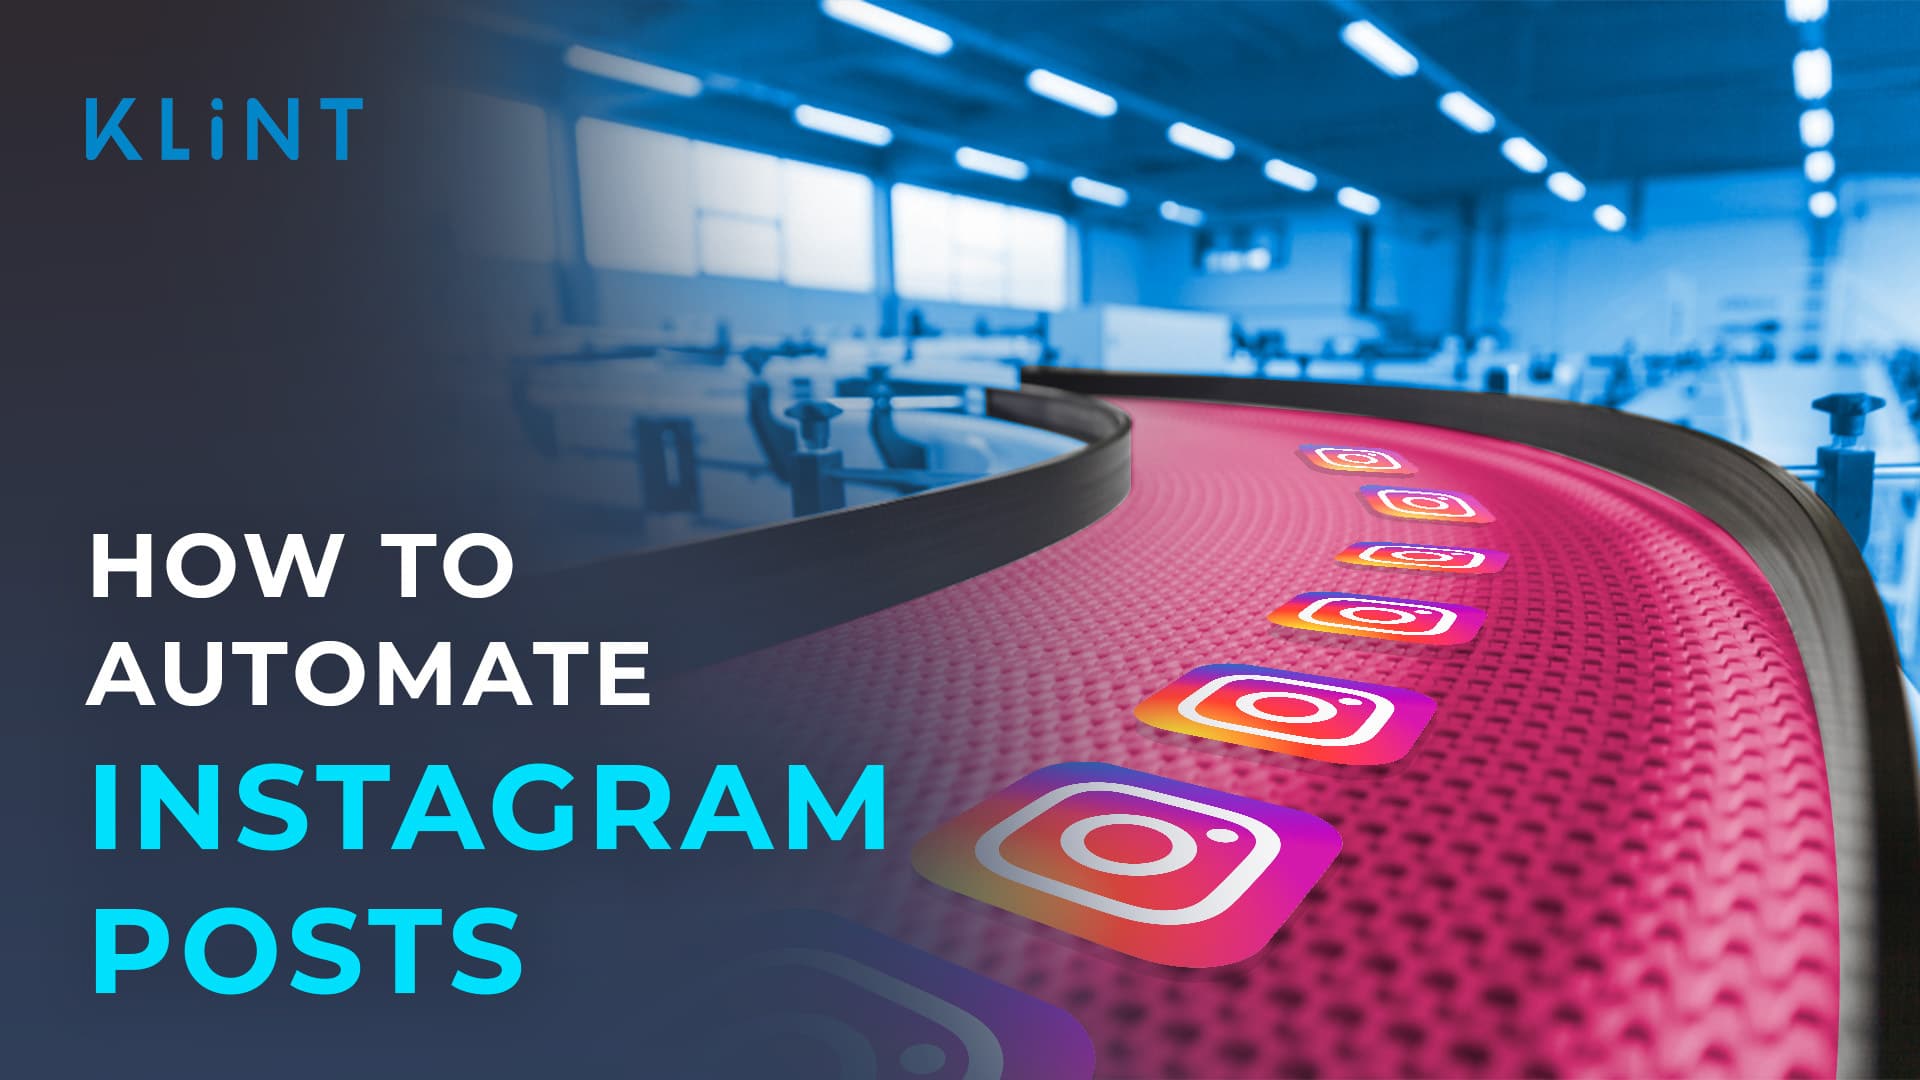 assembly line conveyor belt with the instagram logo on it. Text overlaid: "how to automate instagram posts"